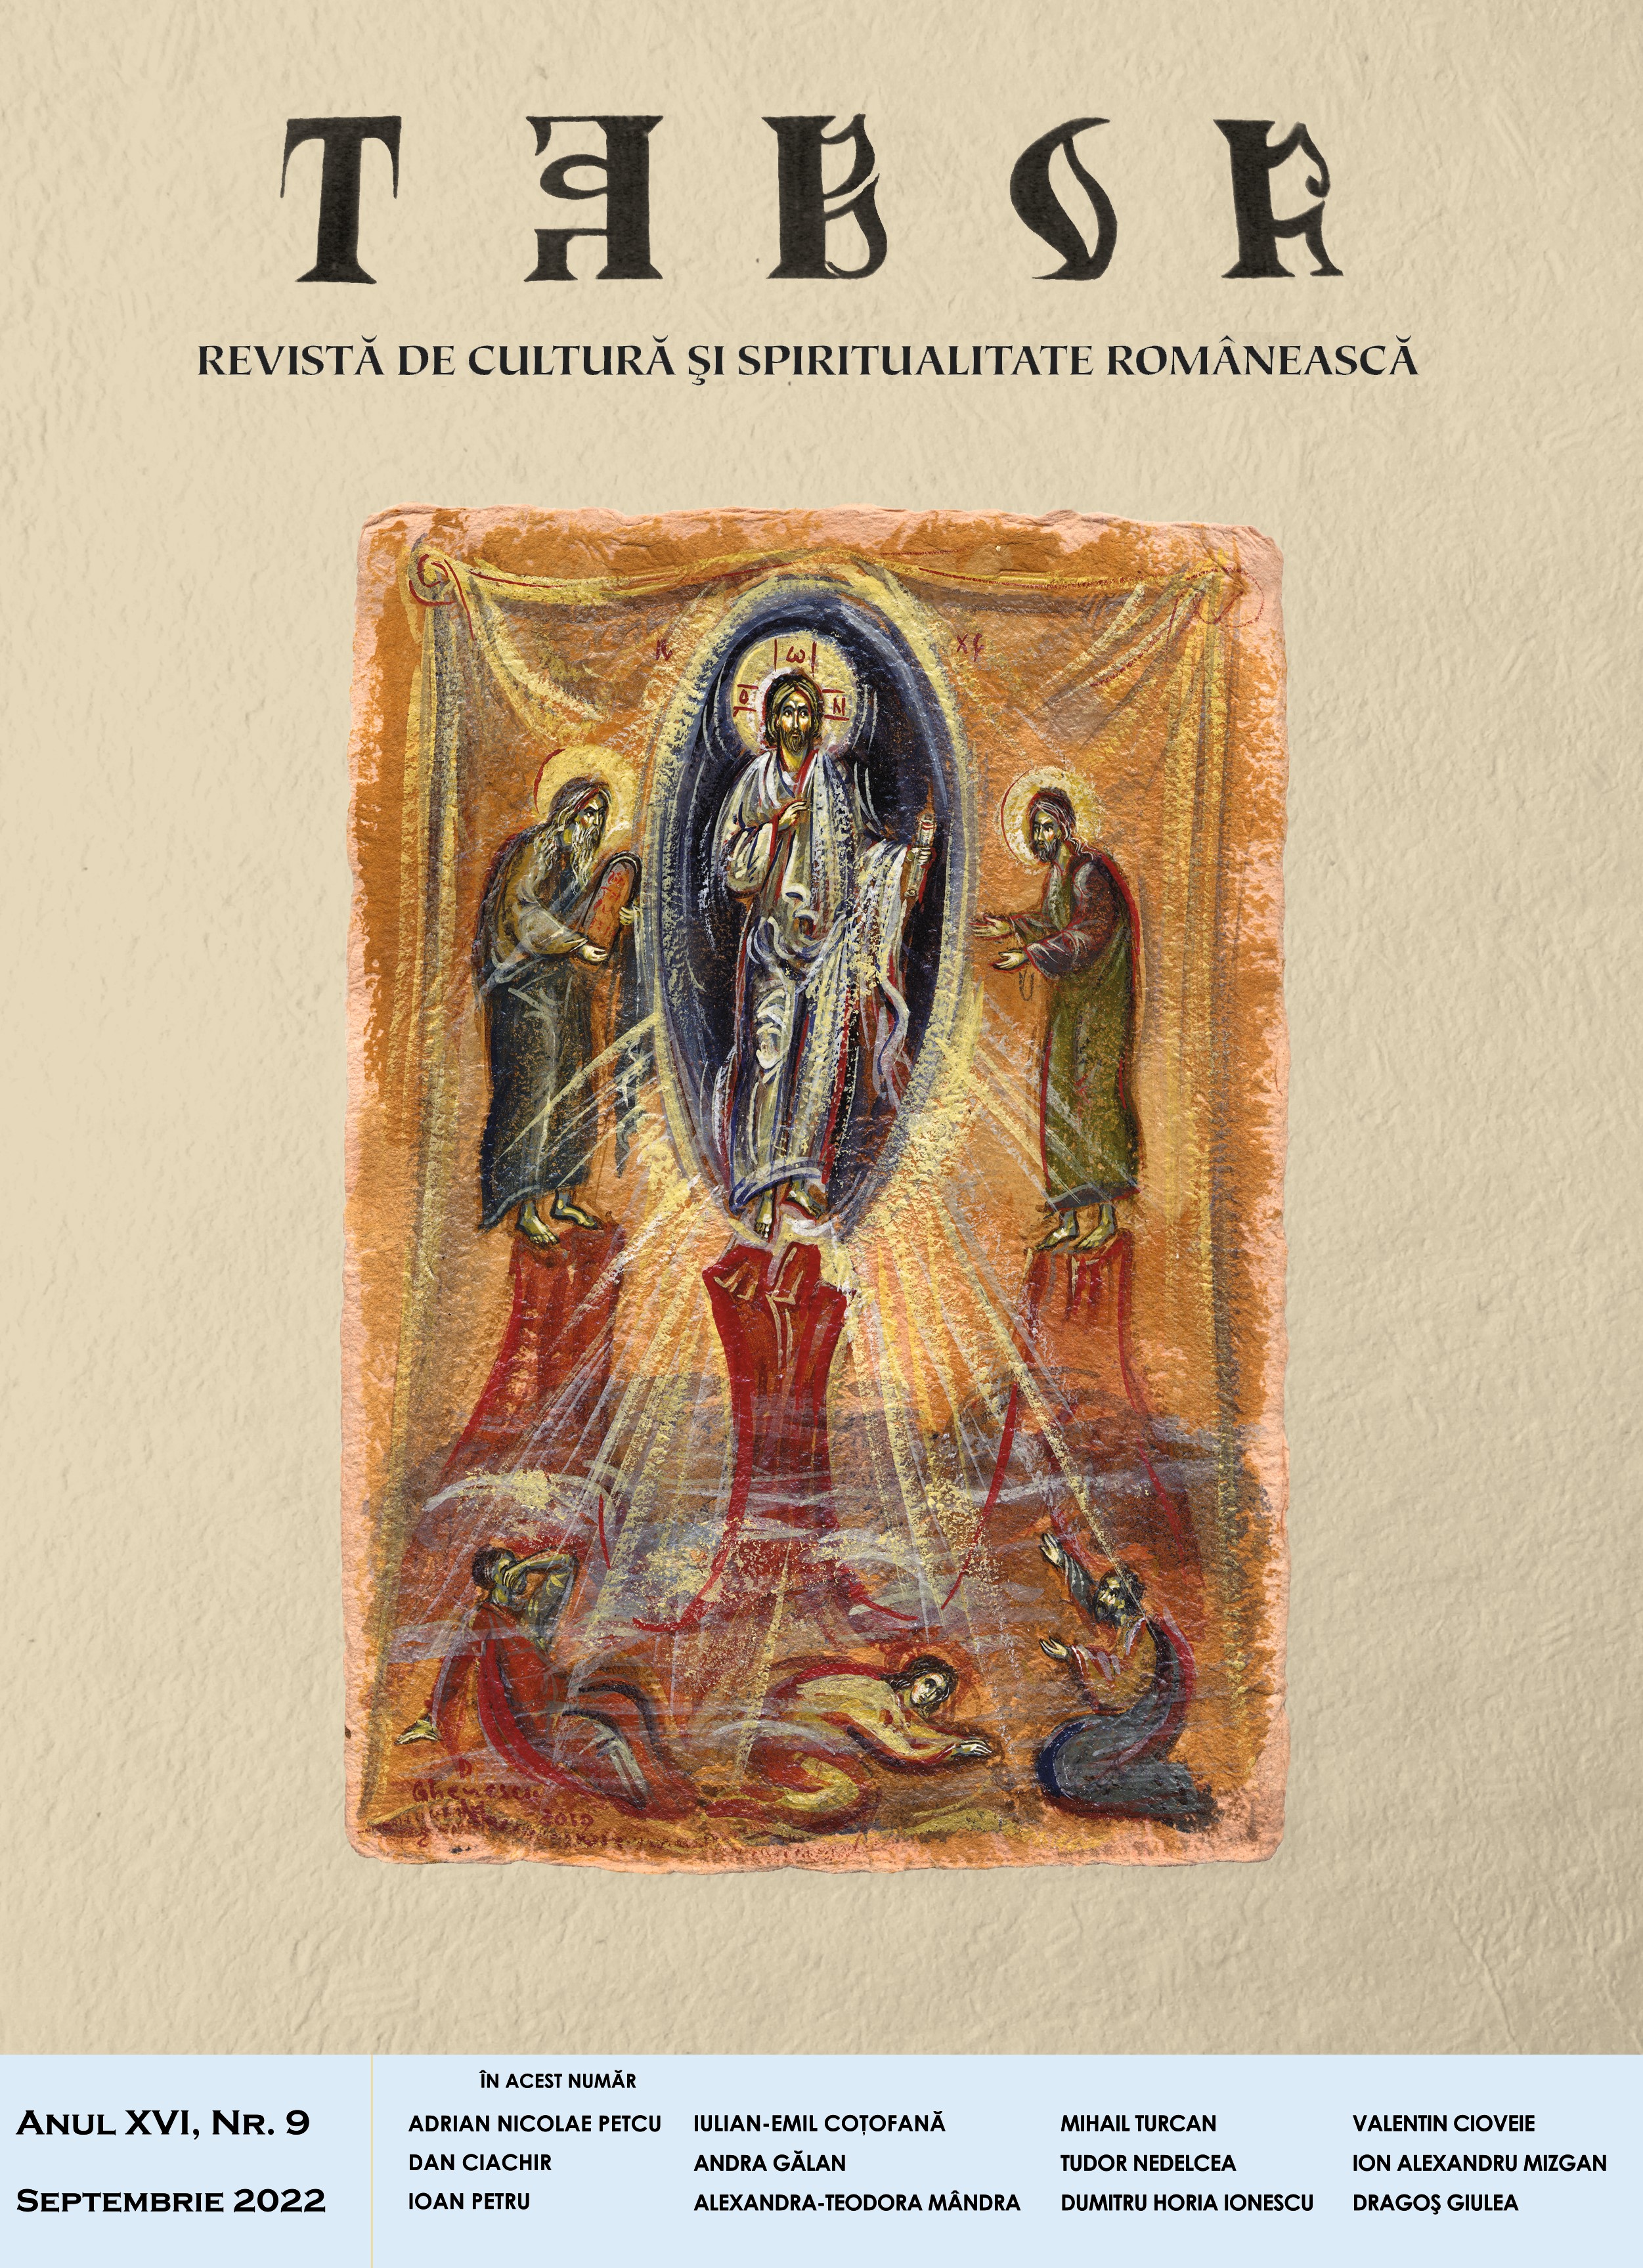 Avram Iancu – 150. “Rightly and justly, the priest who, following the community order, completed the Protocol of the dead in the village of Vidra de Sus, wrote into the column entitled «The profession of the dead»: «Avram Iancu, the Hero of the Roman Cover Image